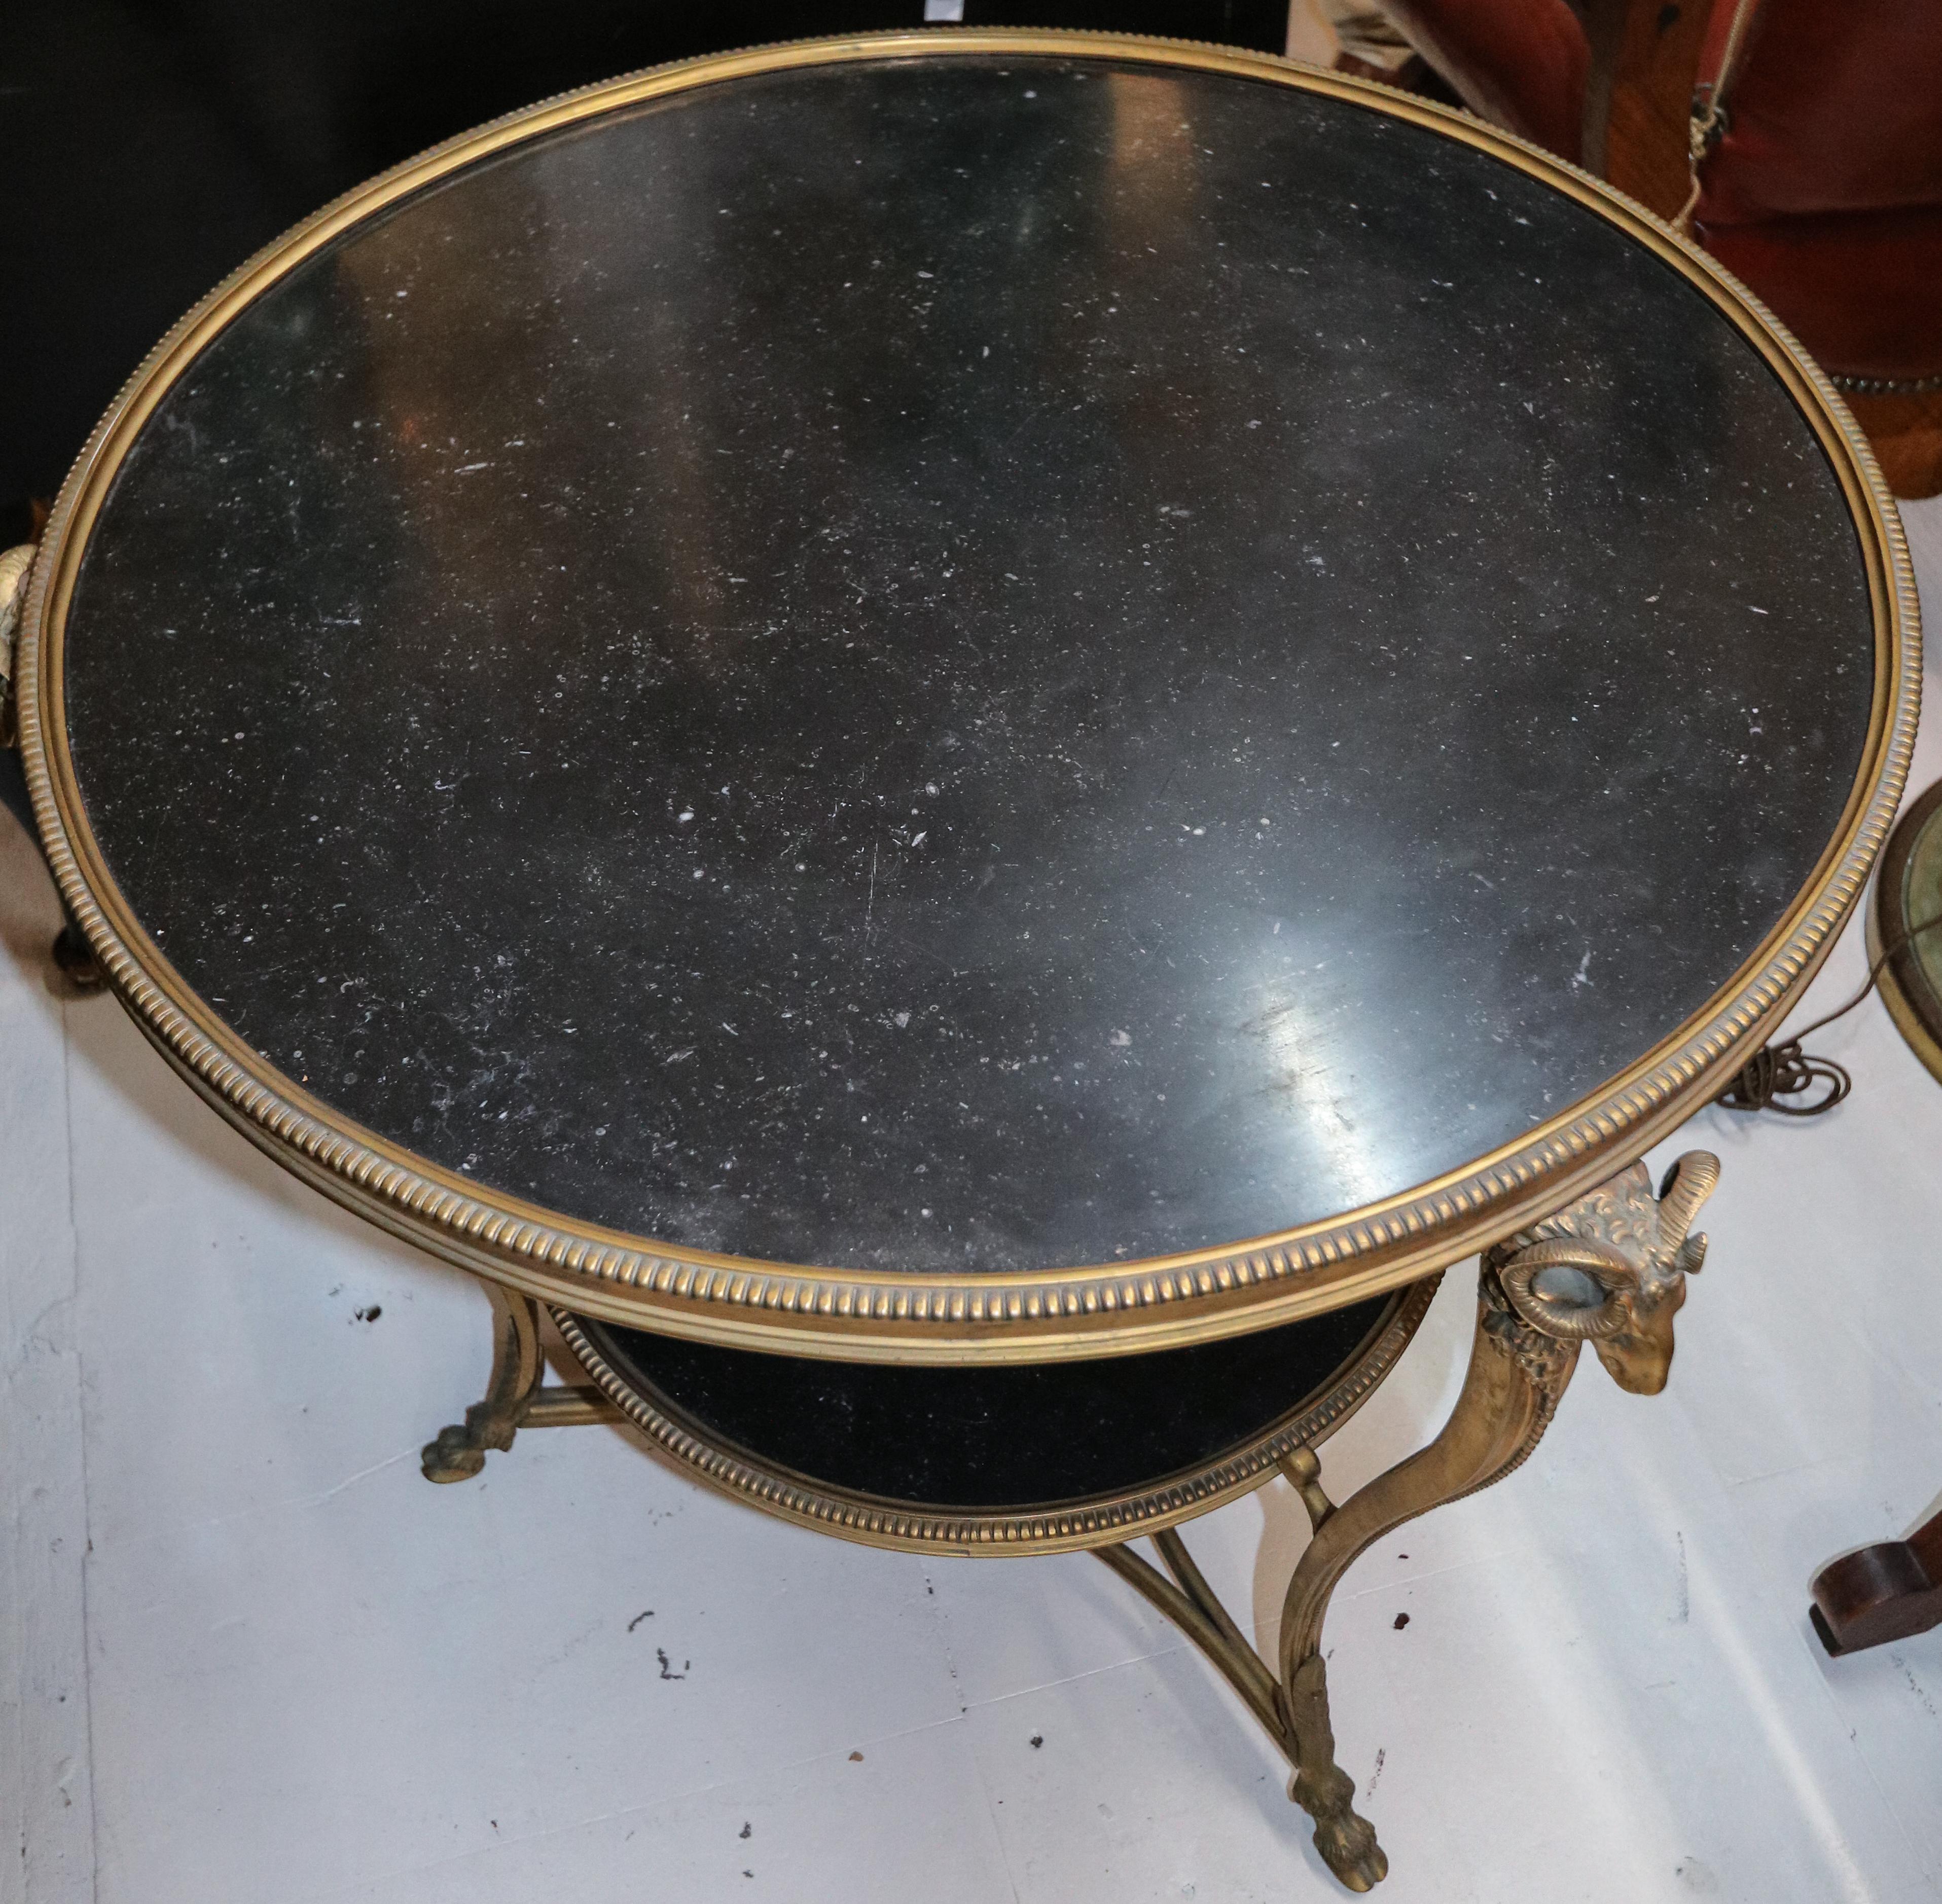 Early 20th Century 1920s French Gueridon Side Table with Ram's Head Details and Marble Top